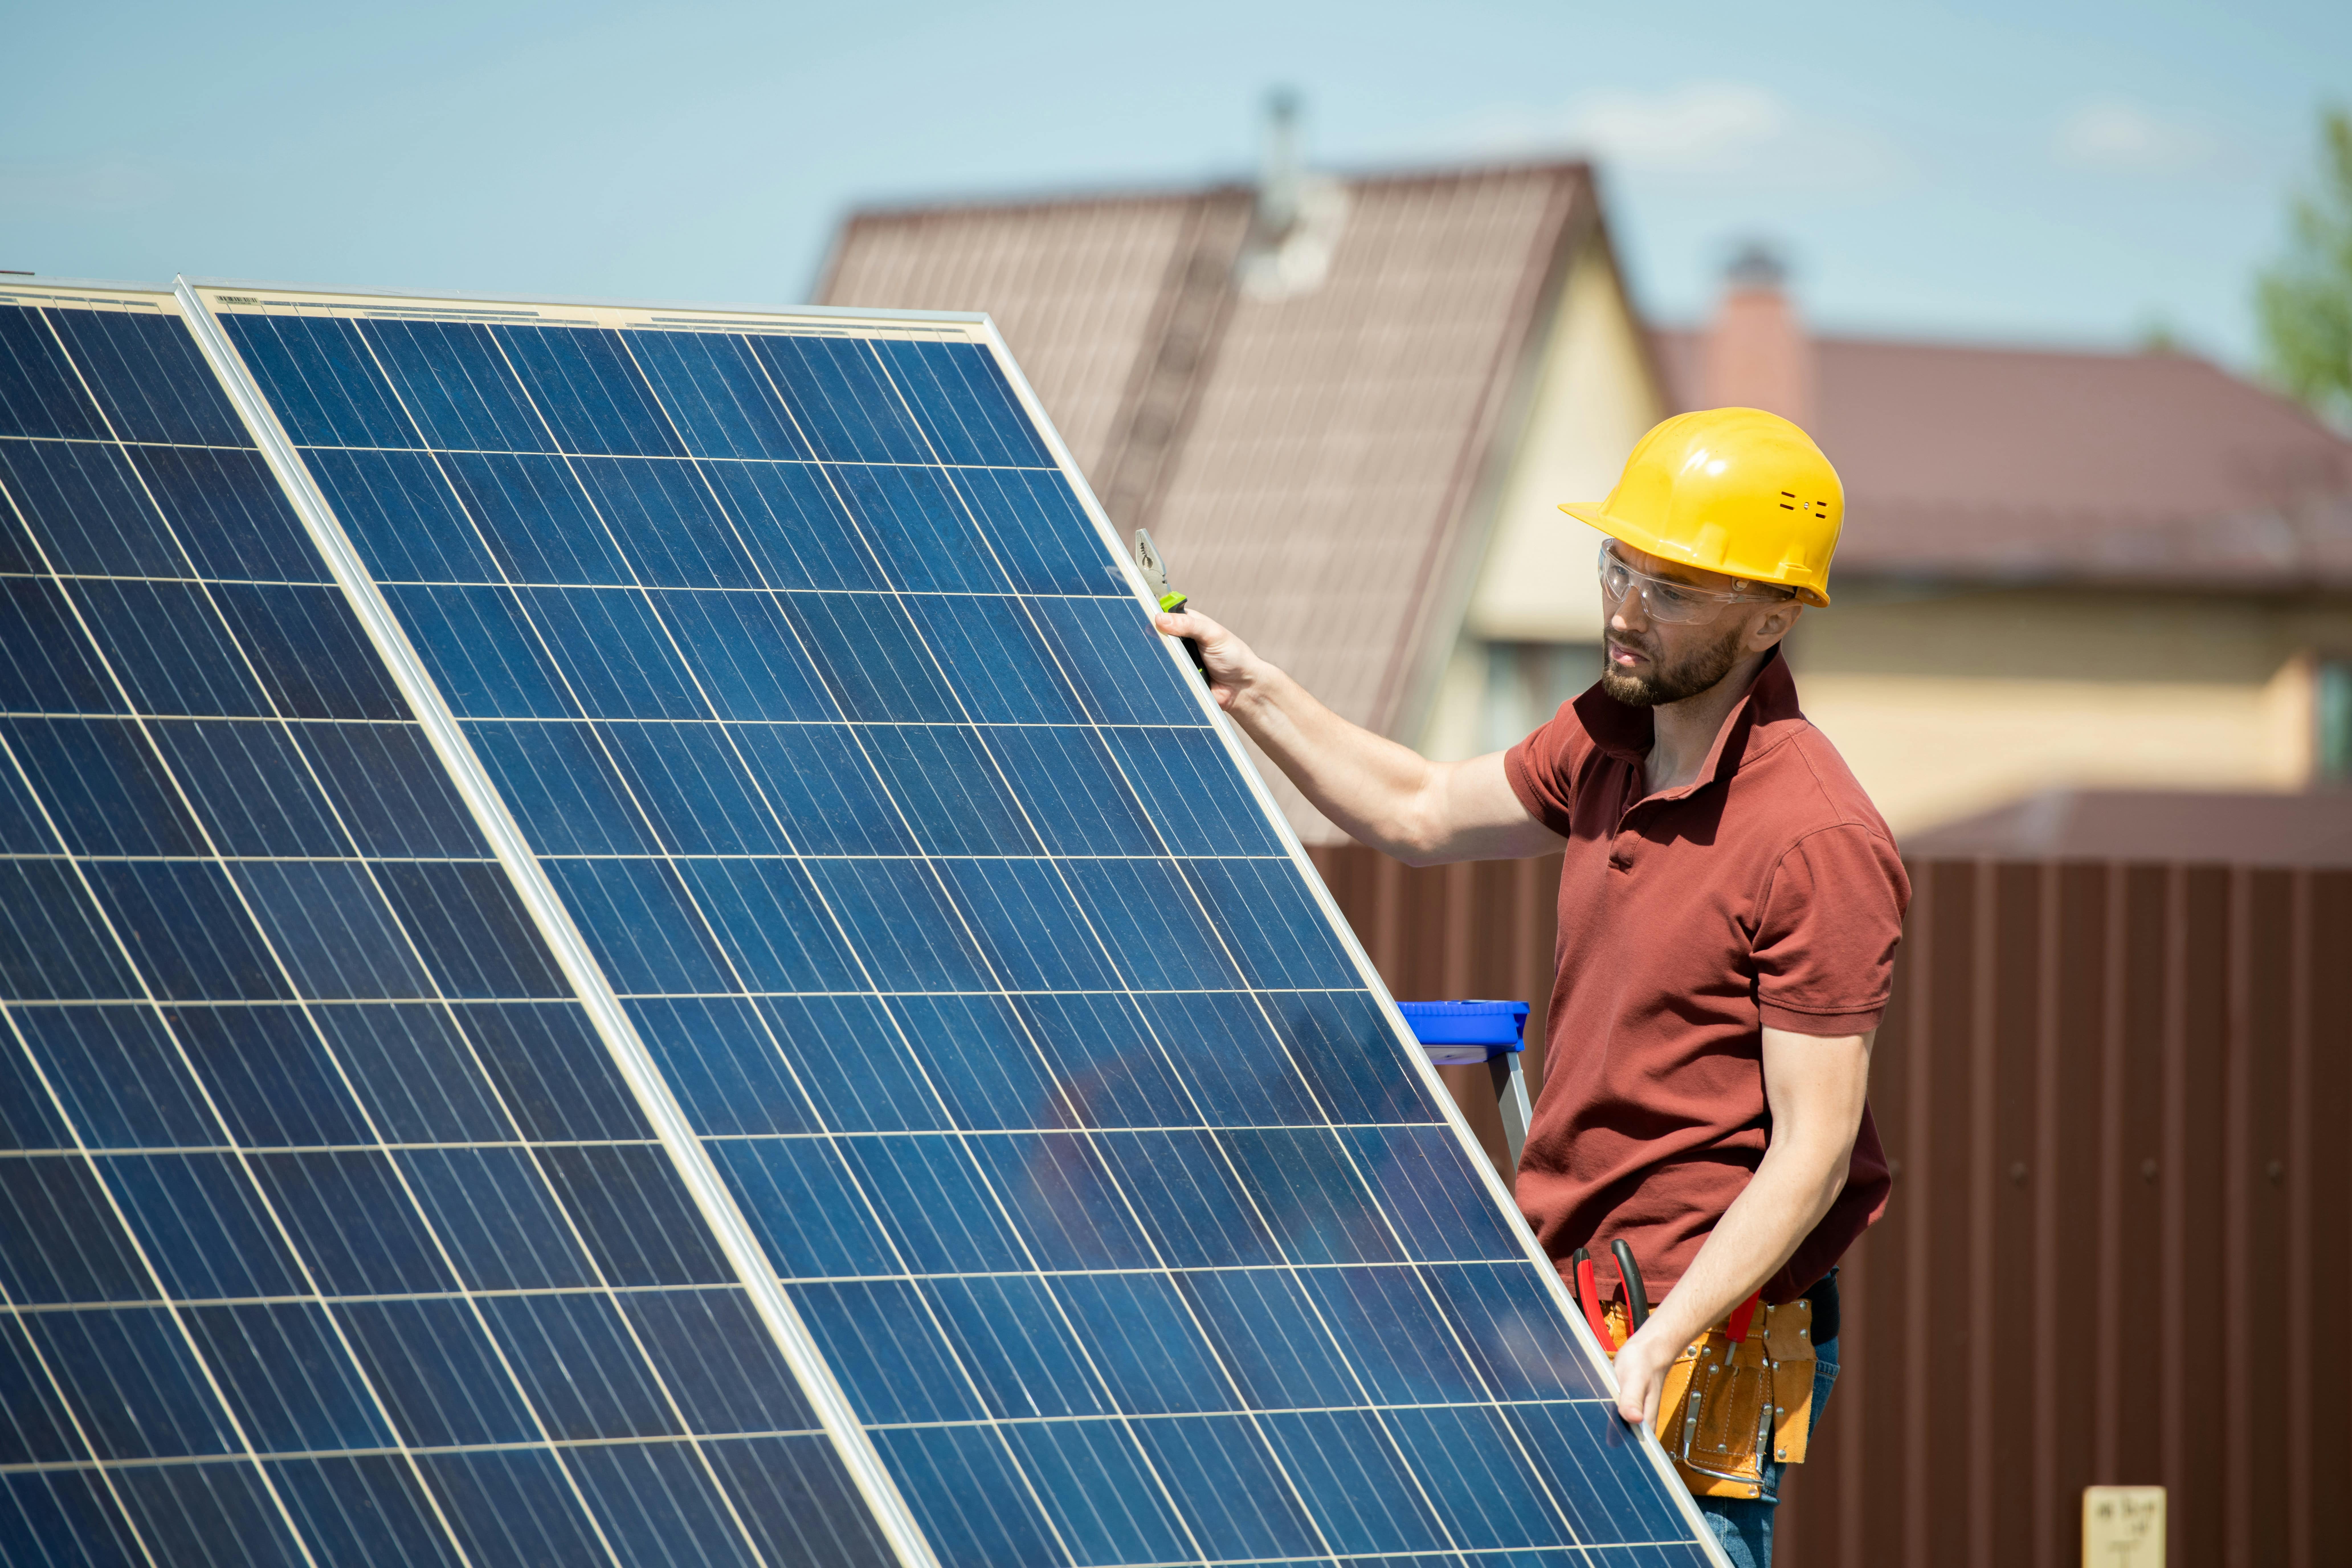 A technician in a hard hat performing maintenance on a solar panel, highlighting the importance of regular upkeep to manage depreciation and maintain efficiency.